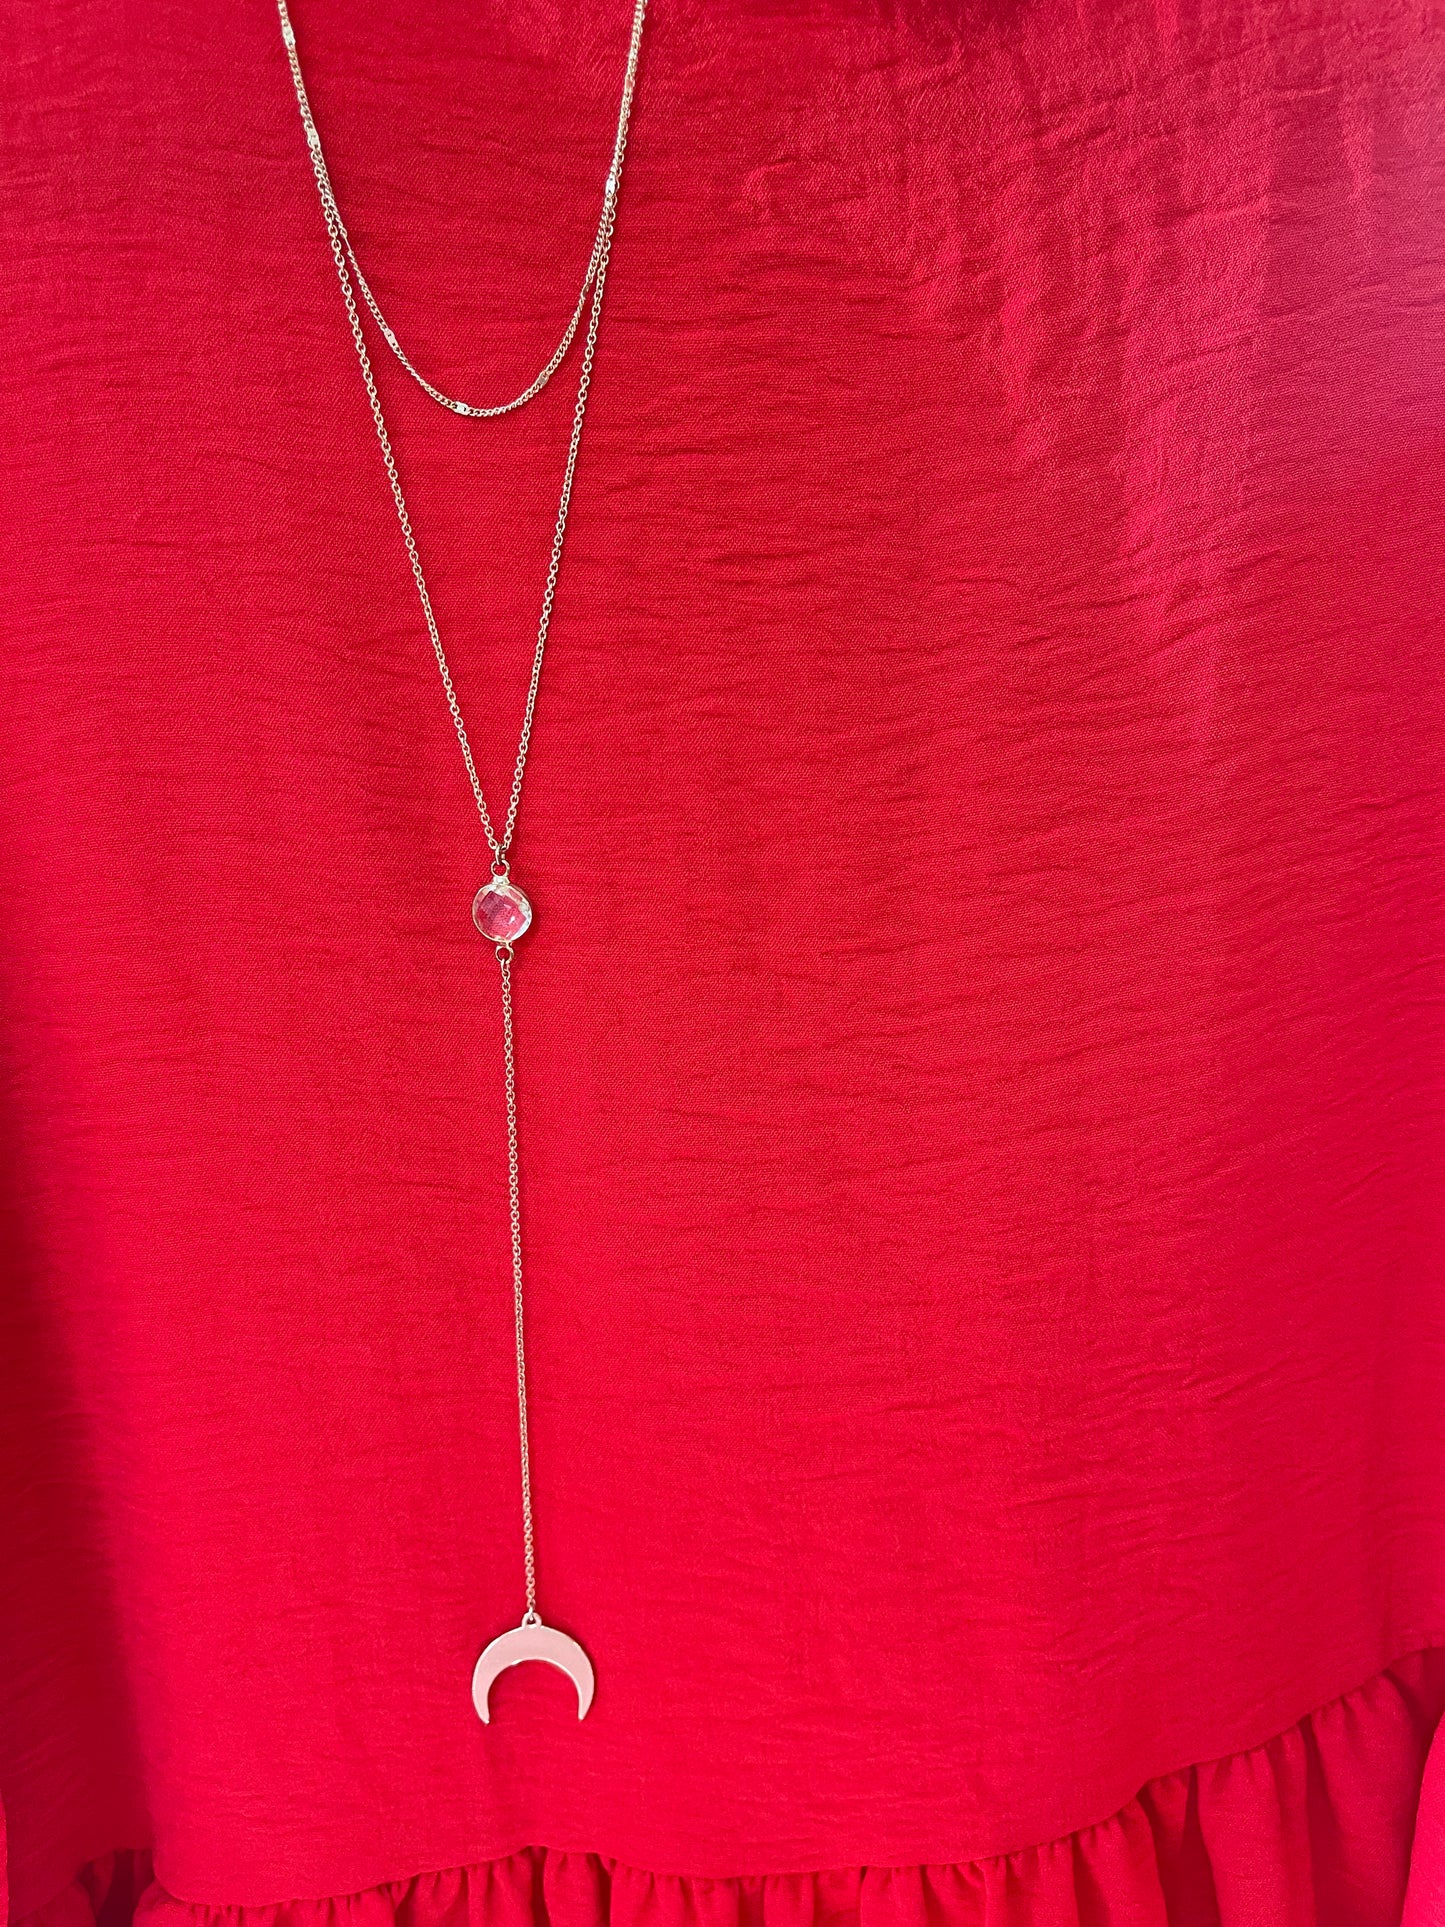 Layered Long Drop Necklace and Earring set